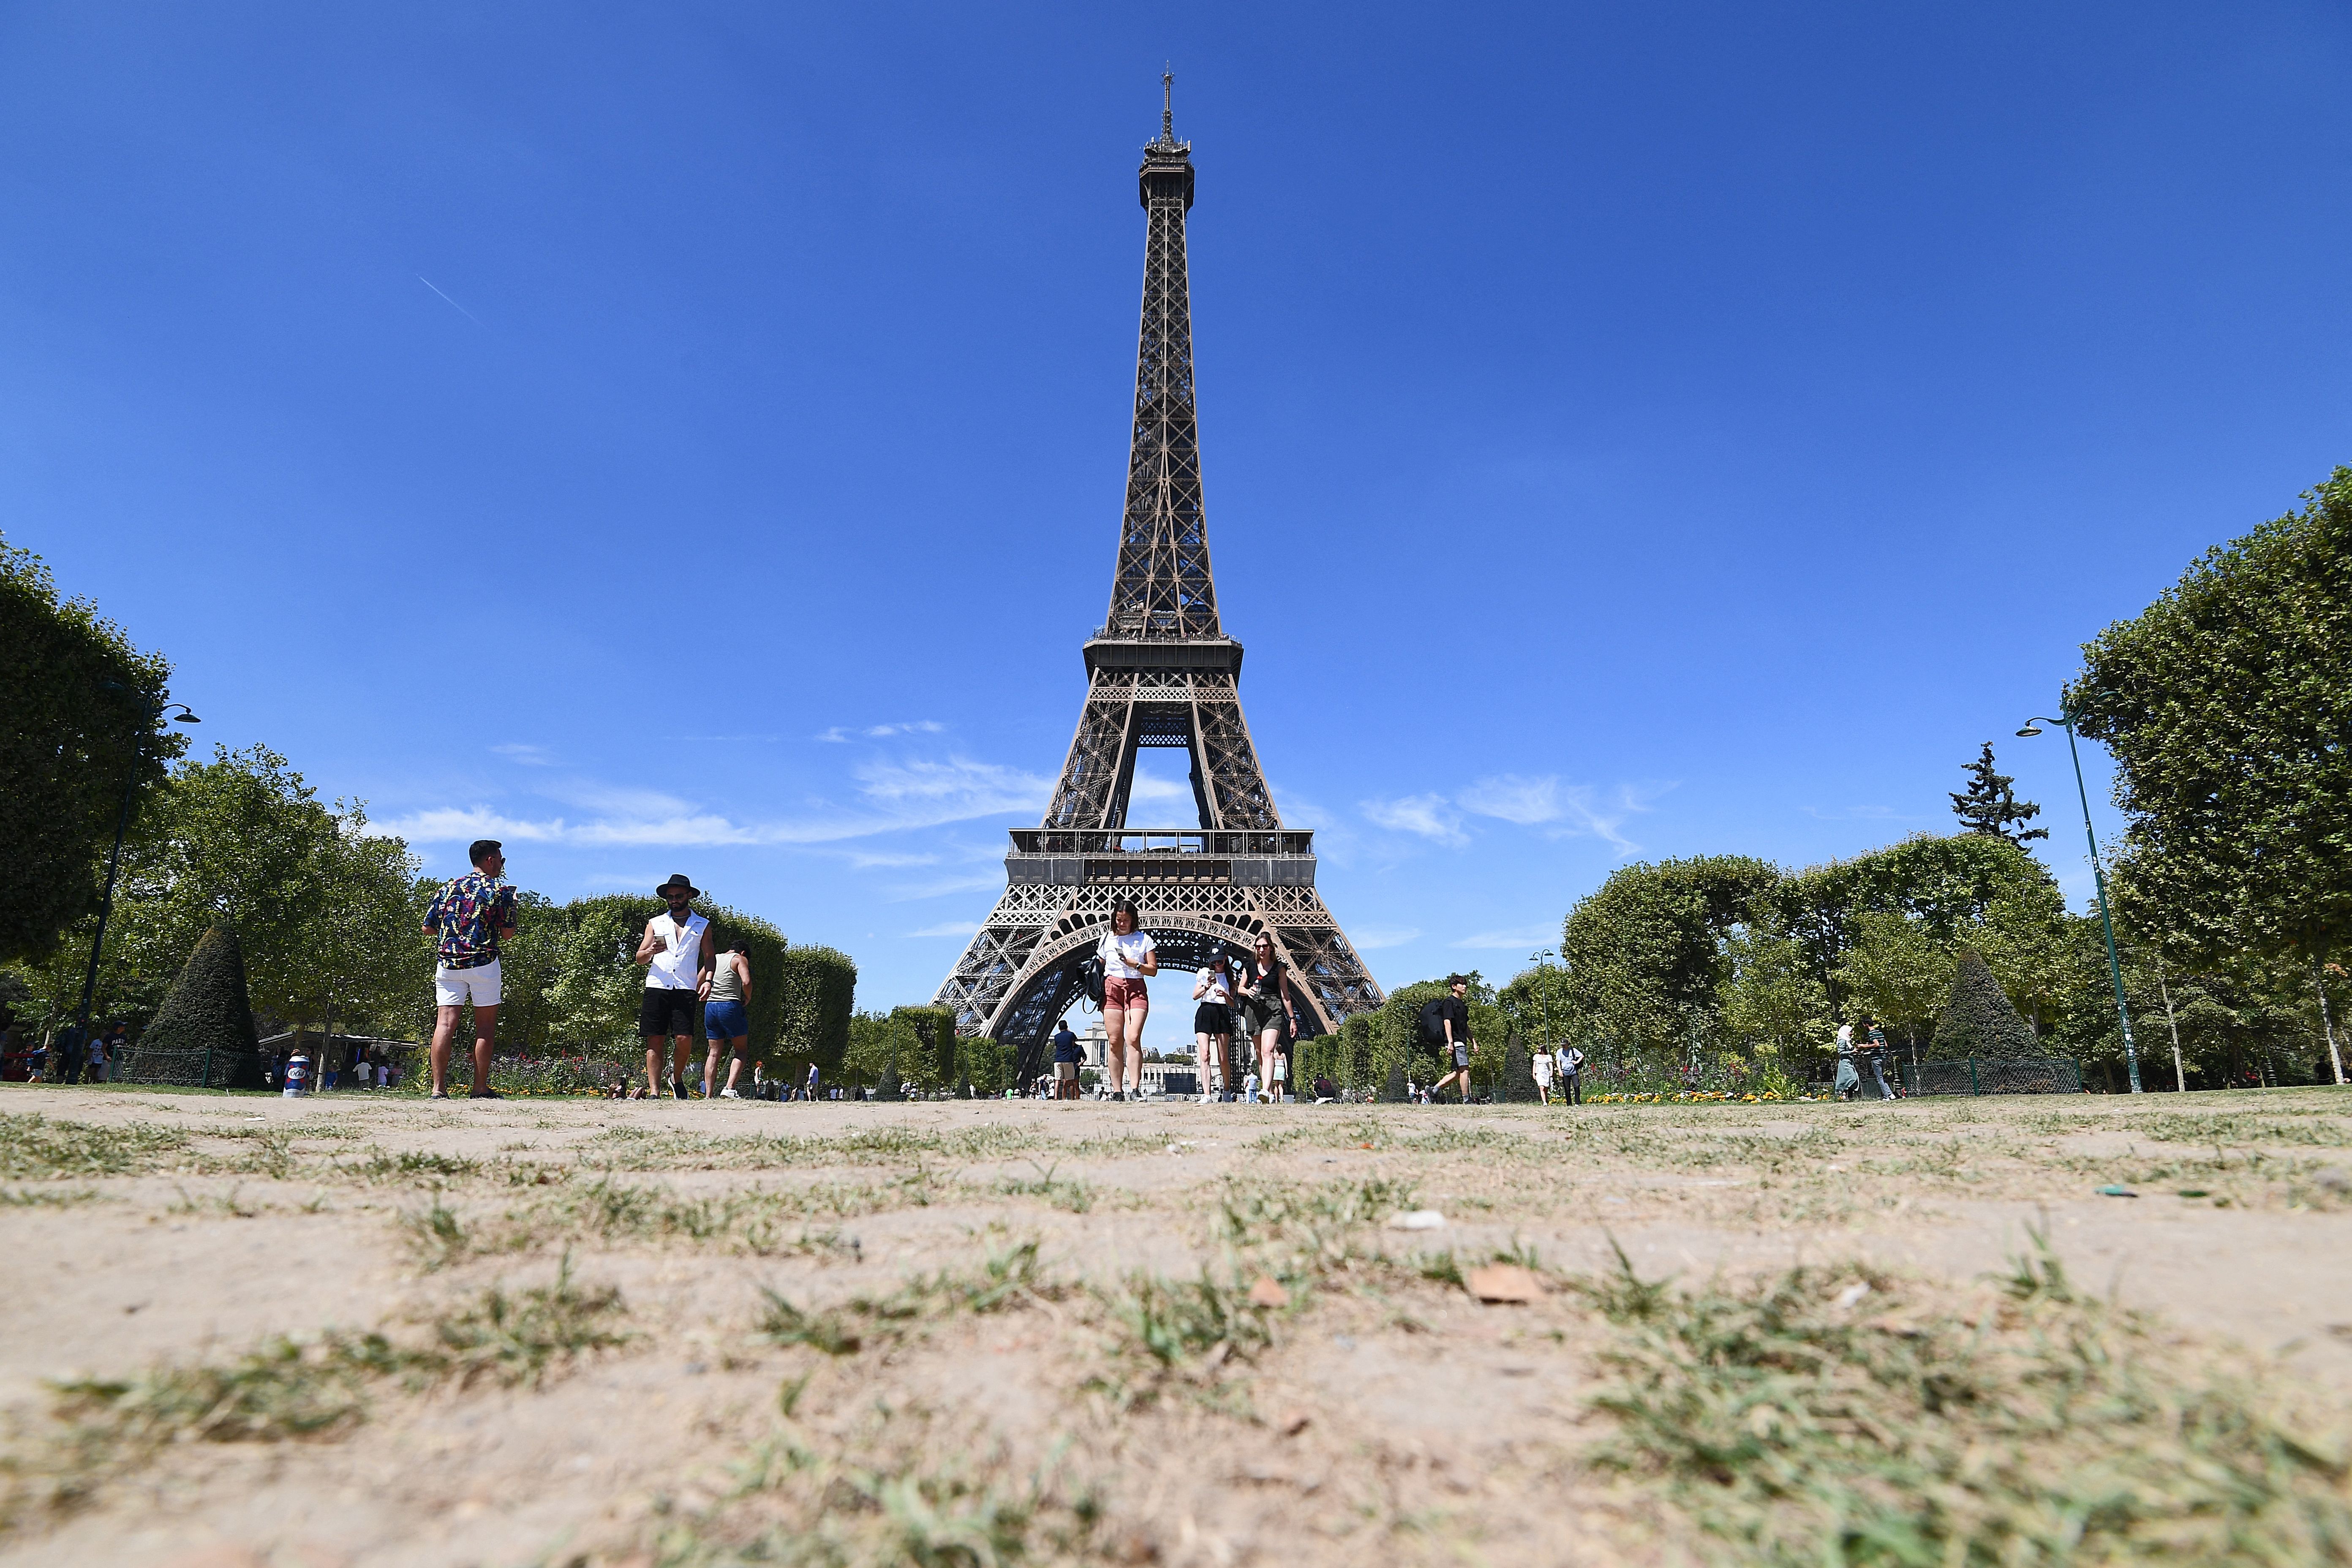 People walk on the dry Champ de Mars in front of the Eiffel Tower in Paris on August 10, 2019. 3 after France recorded its driest July on record. 